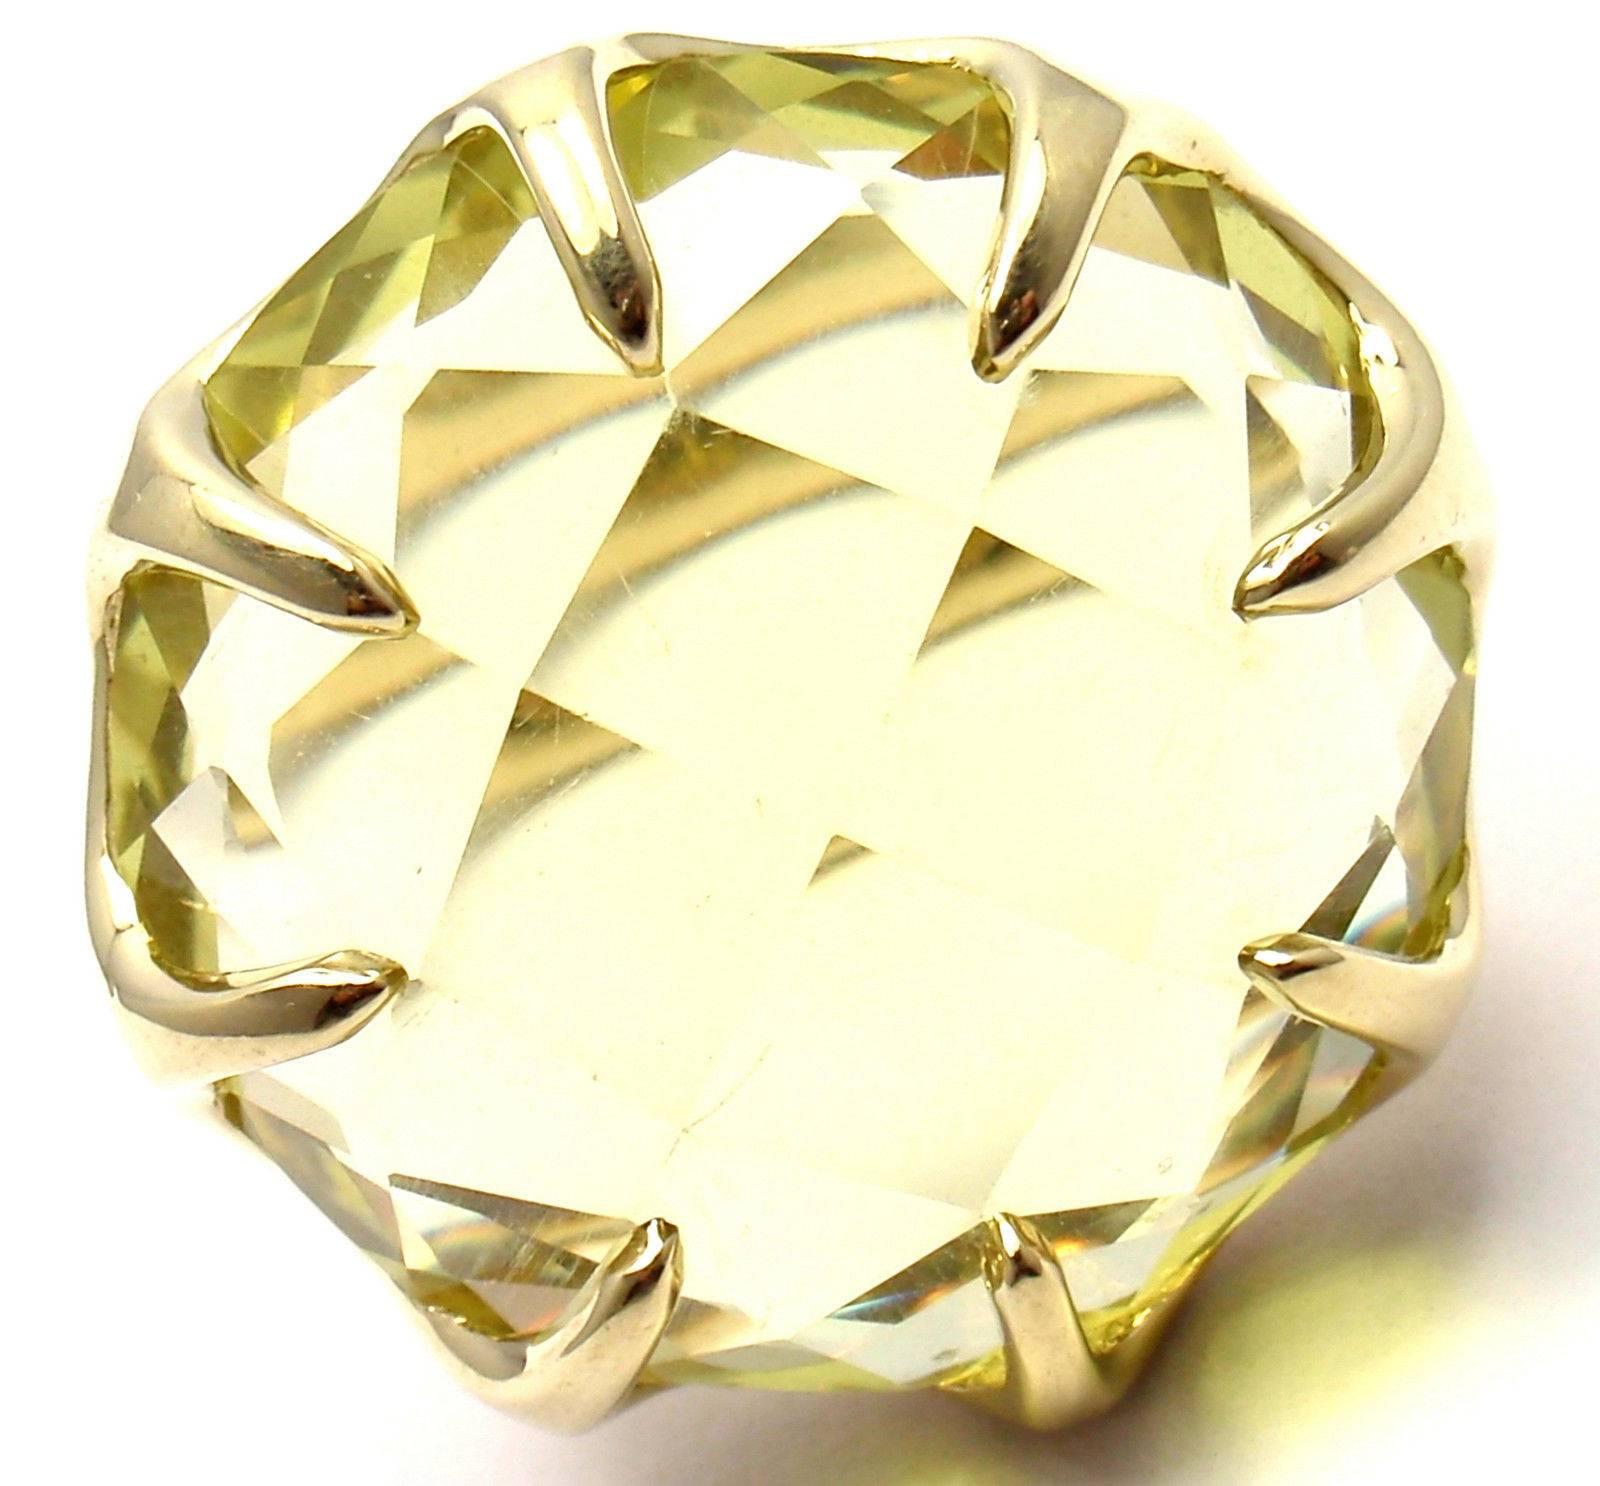 18k Yellow Gold Extra Large Lemon Citrine Lollipop Ring by Ippolita. 
With 1 extra large round lemon citrine 24mm

Details: 
Size: 6.5
Weight: 18.5 grams
Width: 25mm
Stamped Hallmarks: Ippolita 18k
*Free Shipping within the United States*

YOUR